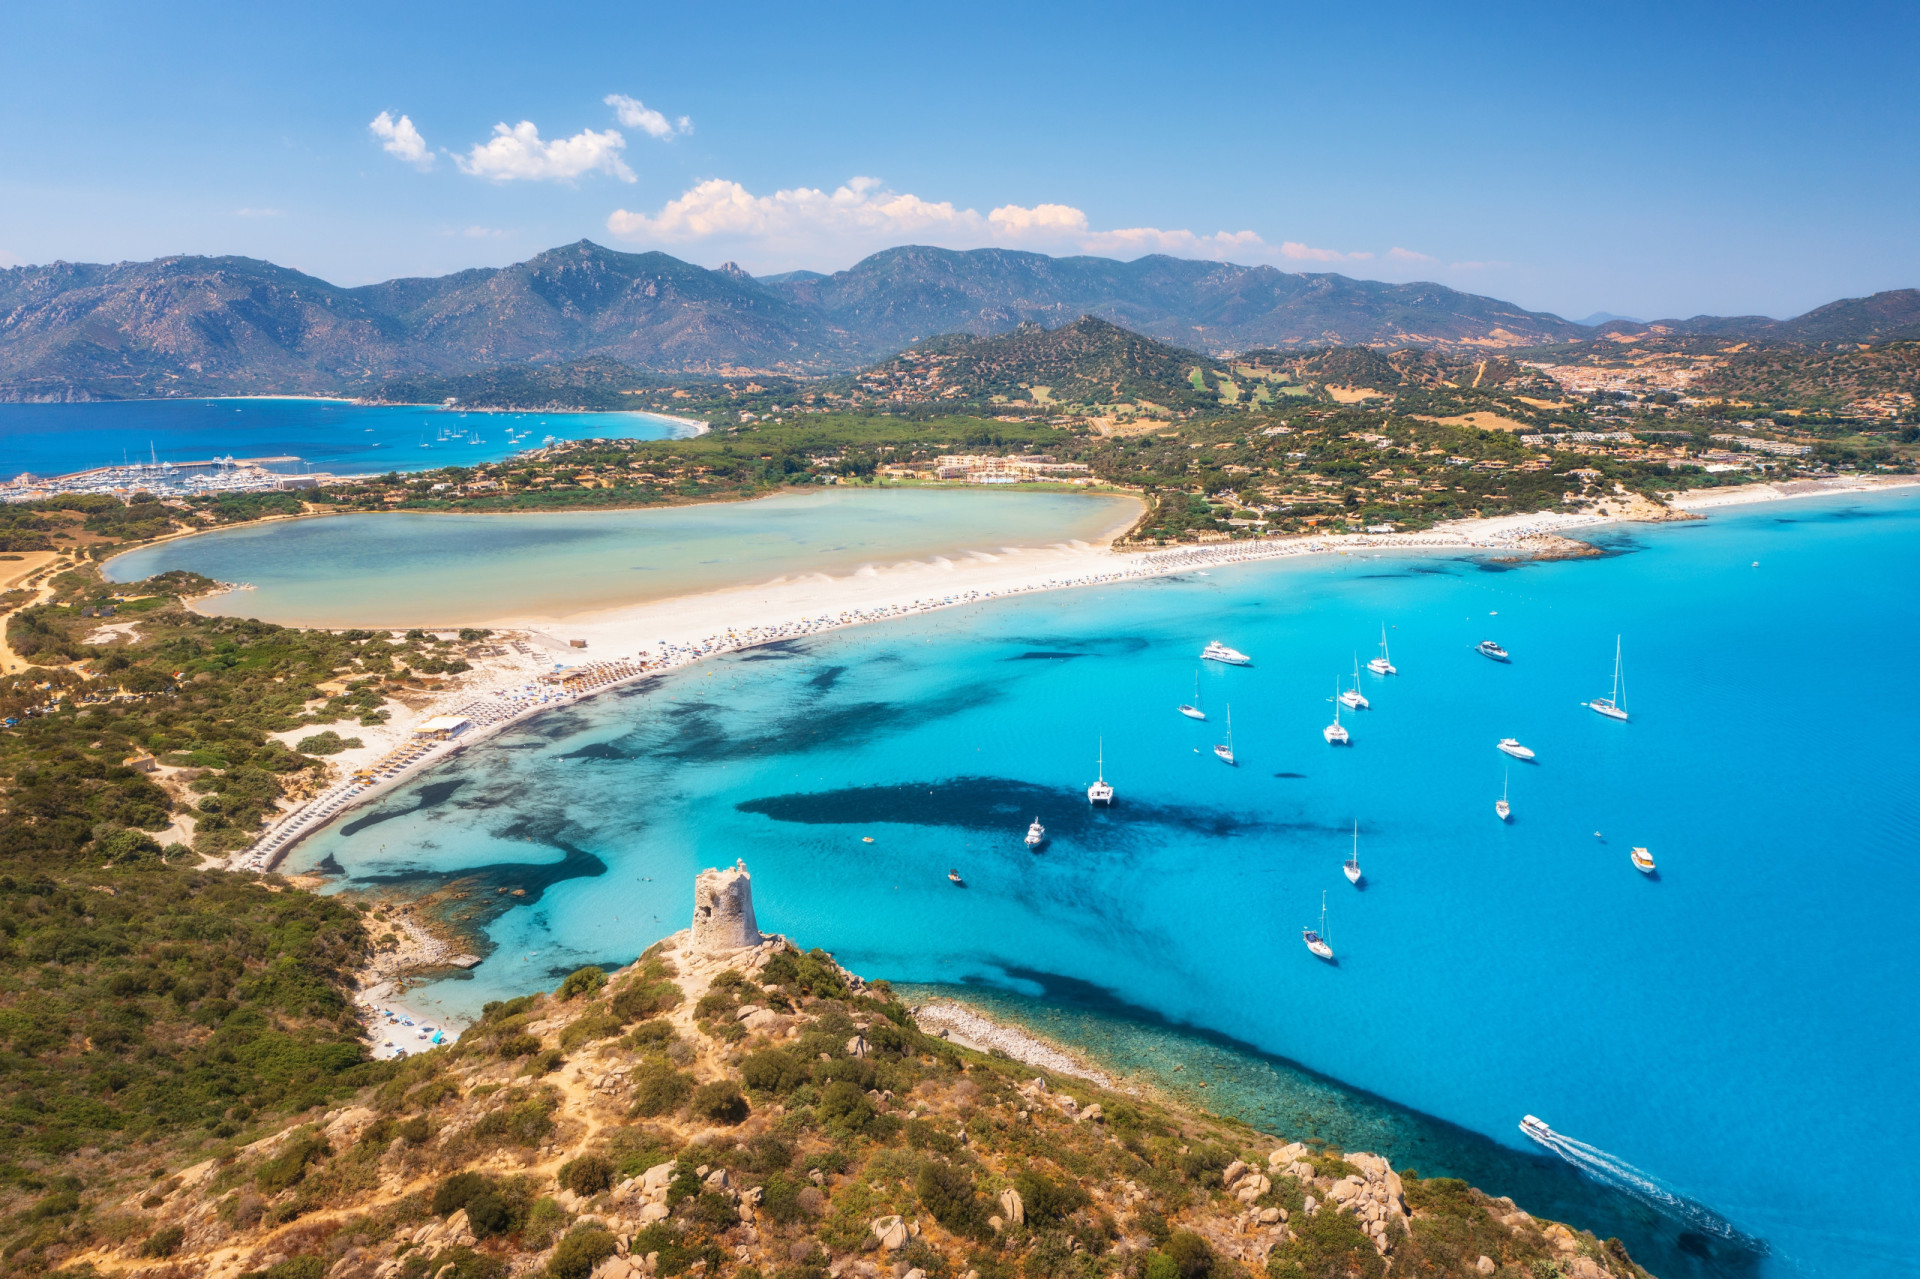 <p>Score: 3.939</p> <p>Located in the southeastern corner of Sardinia, Porto Giunco is one of the finest beaches on the island.</p><p>You may also like:<a href="https://www.starsinsider.com/n/492041?utm_source=msn.com&utm_medium=display&utm_campaign=referral_description&utm_content=697708en-en_selected"> Discover Satan's equivalents in religions around the world</a></p>